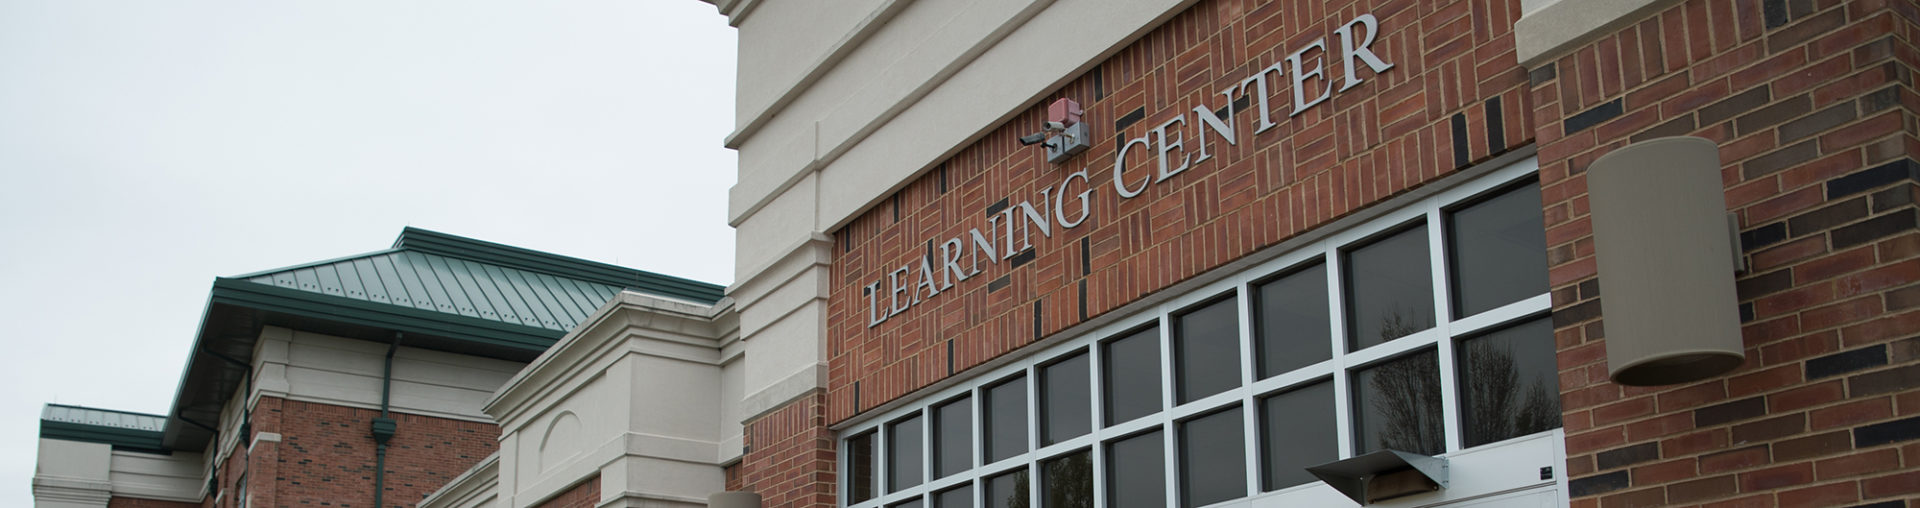 Quincy campus Learning Center